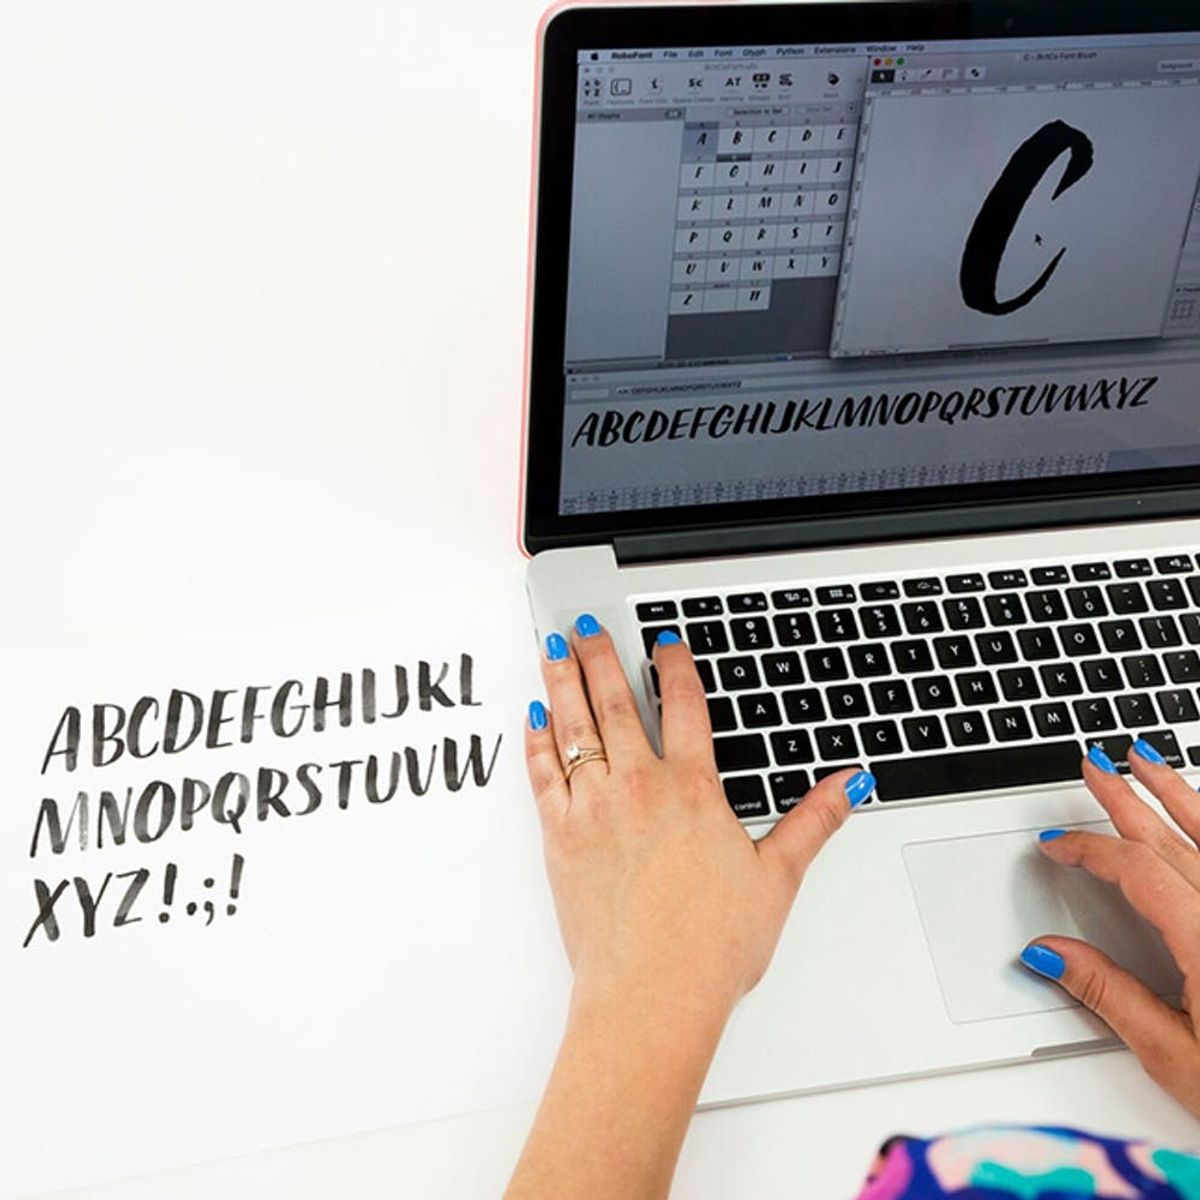 Learn How to Make Your Own Font To Typeface All The Things - Brit + Co